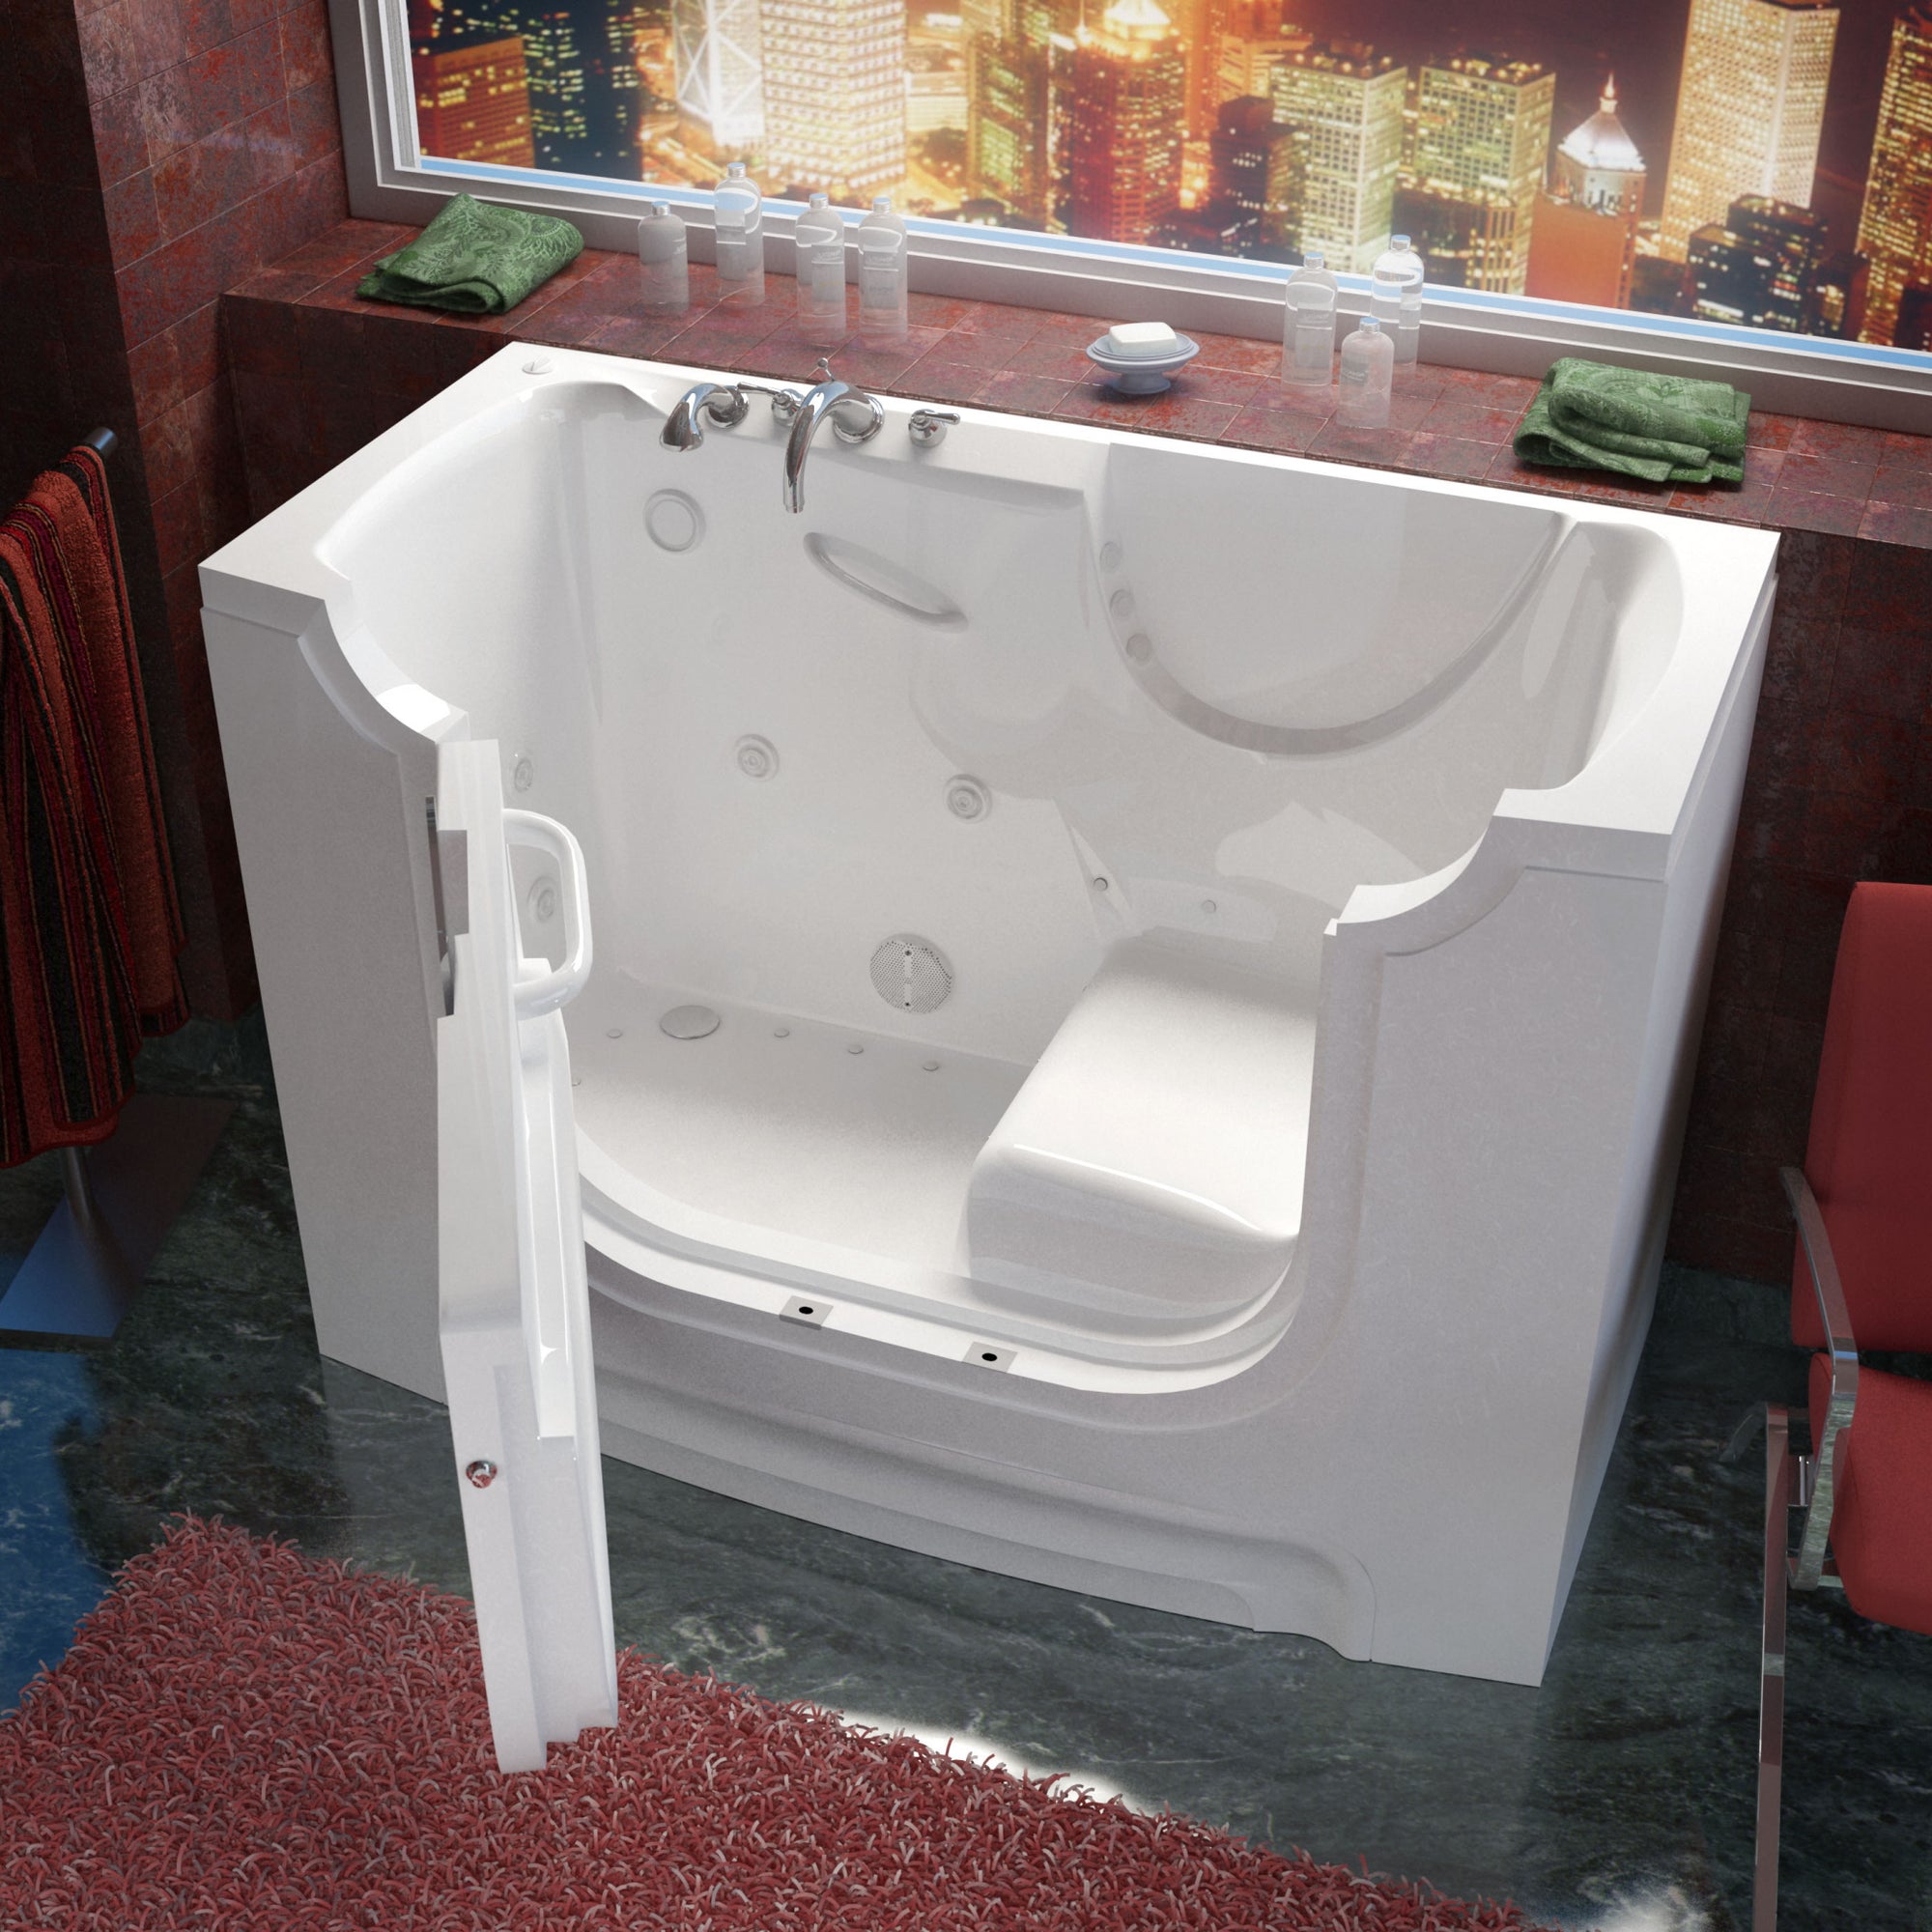 Meditub 30 x 60 White Wheelchair Accessible Bathtub - High-grade marine fiberglass with triple gel coating - White Finish and color matching trim - Outward swinging door - Left side drain - with 15 in. Threshold & 21 in. Seat Height, built-in grab bar - Air Jetted - Lifestyle - 3060WCA - Vital Hydrotherapy